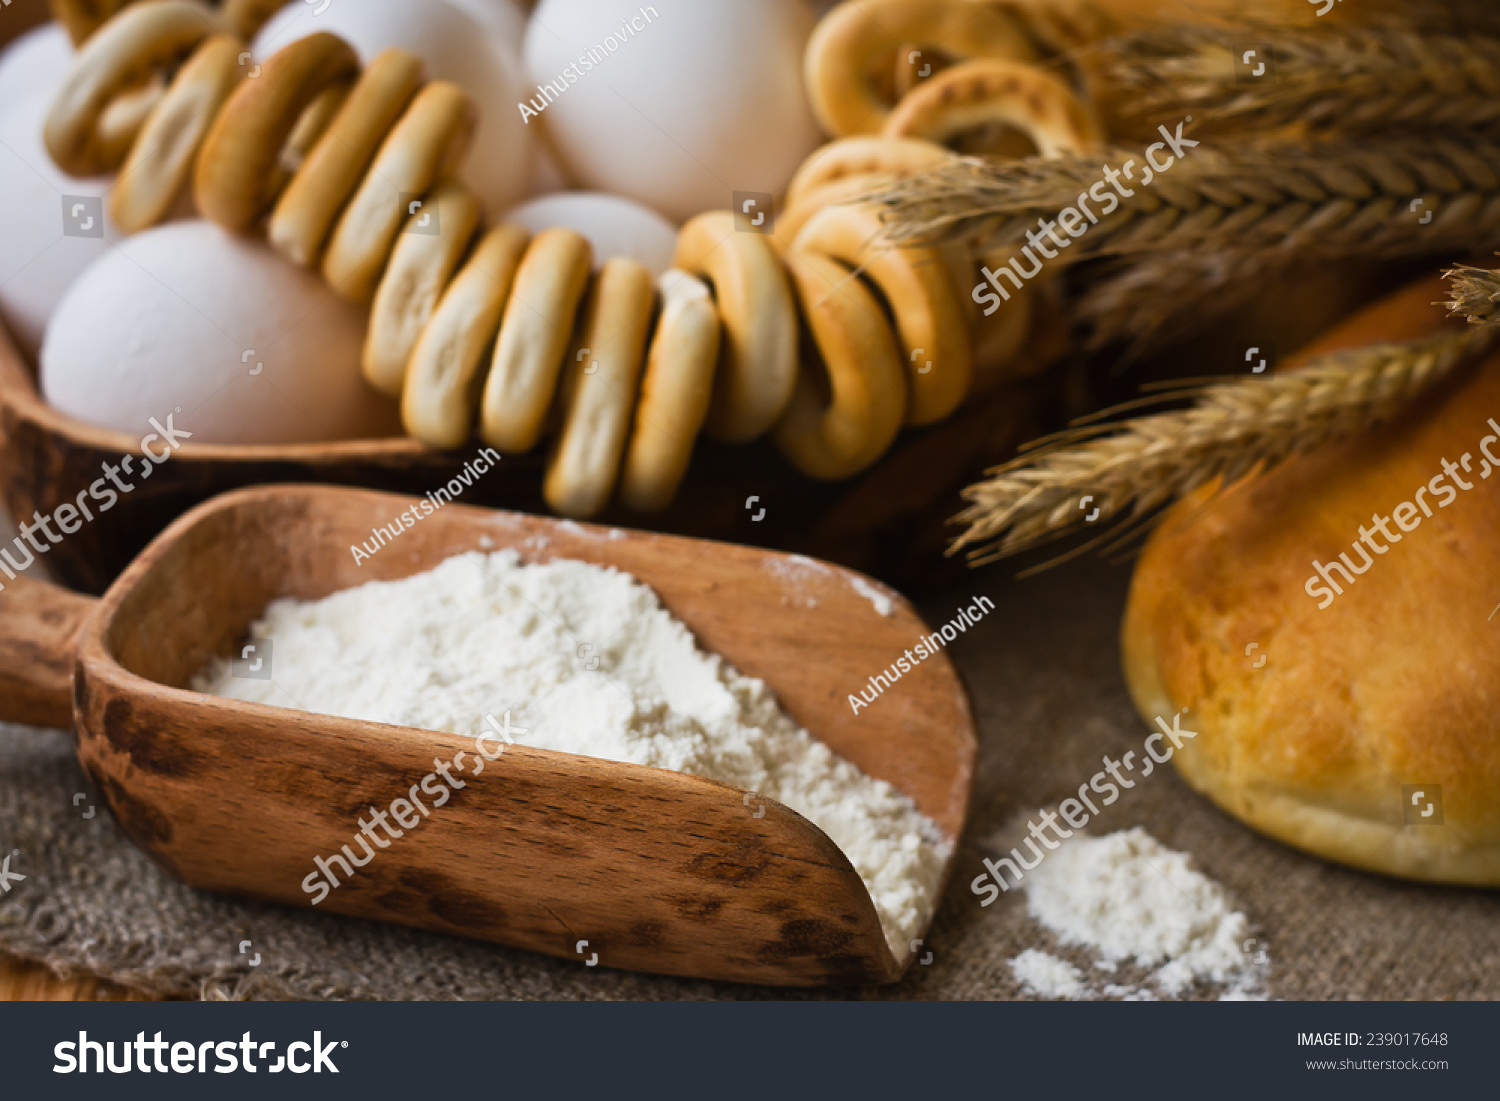 Composition with bread in retro style #239017648